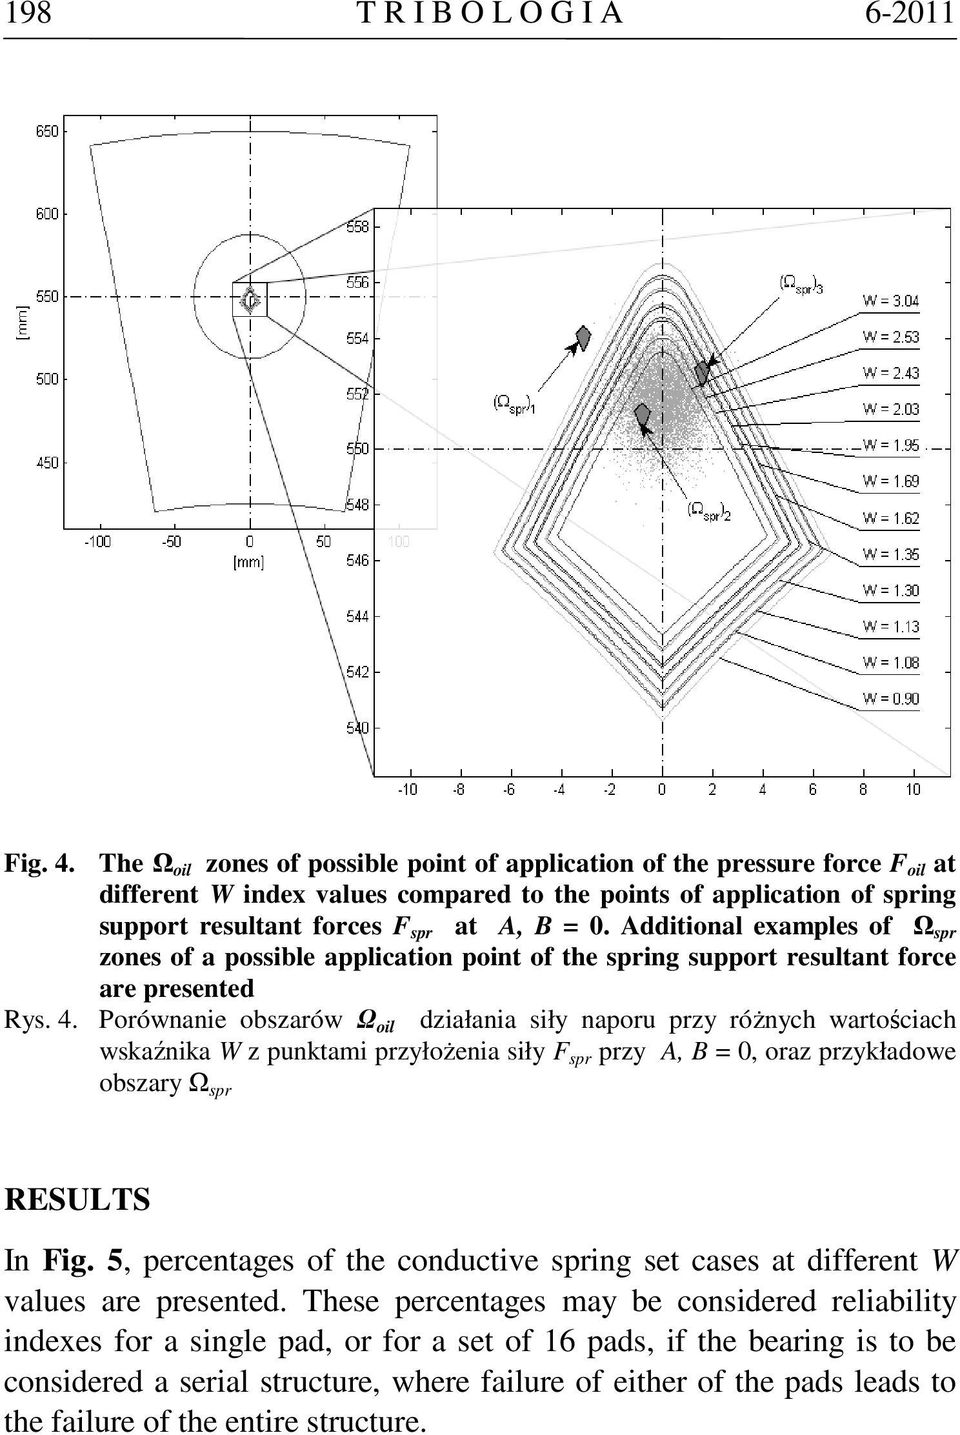 Additional examples of Ω spr zones of a possible application point of the spring support resultant force are presented Rys. 4.